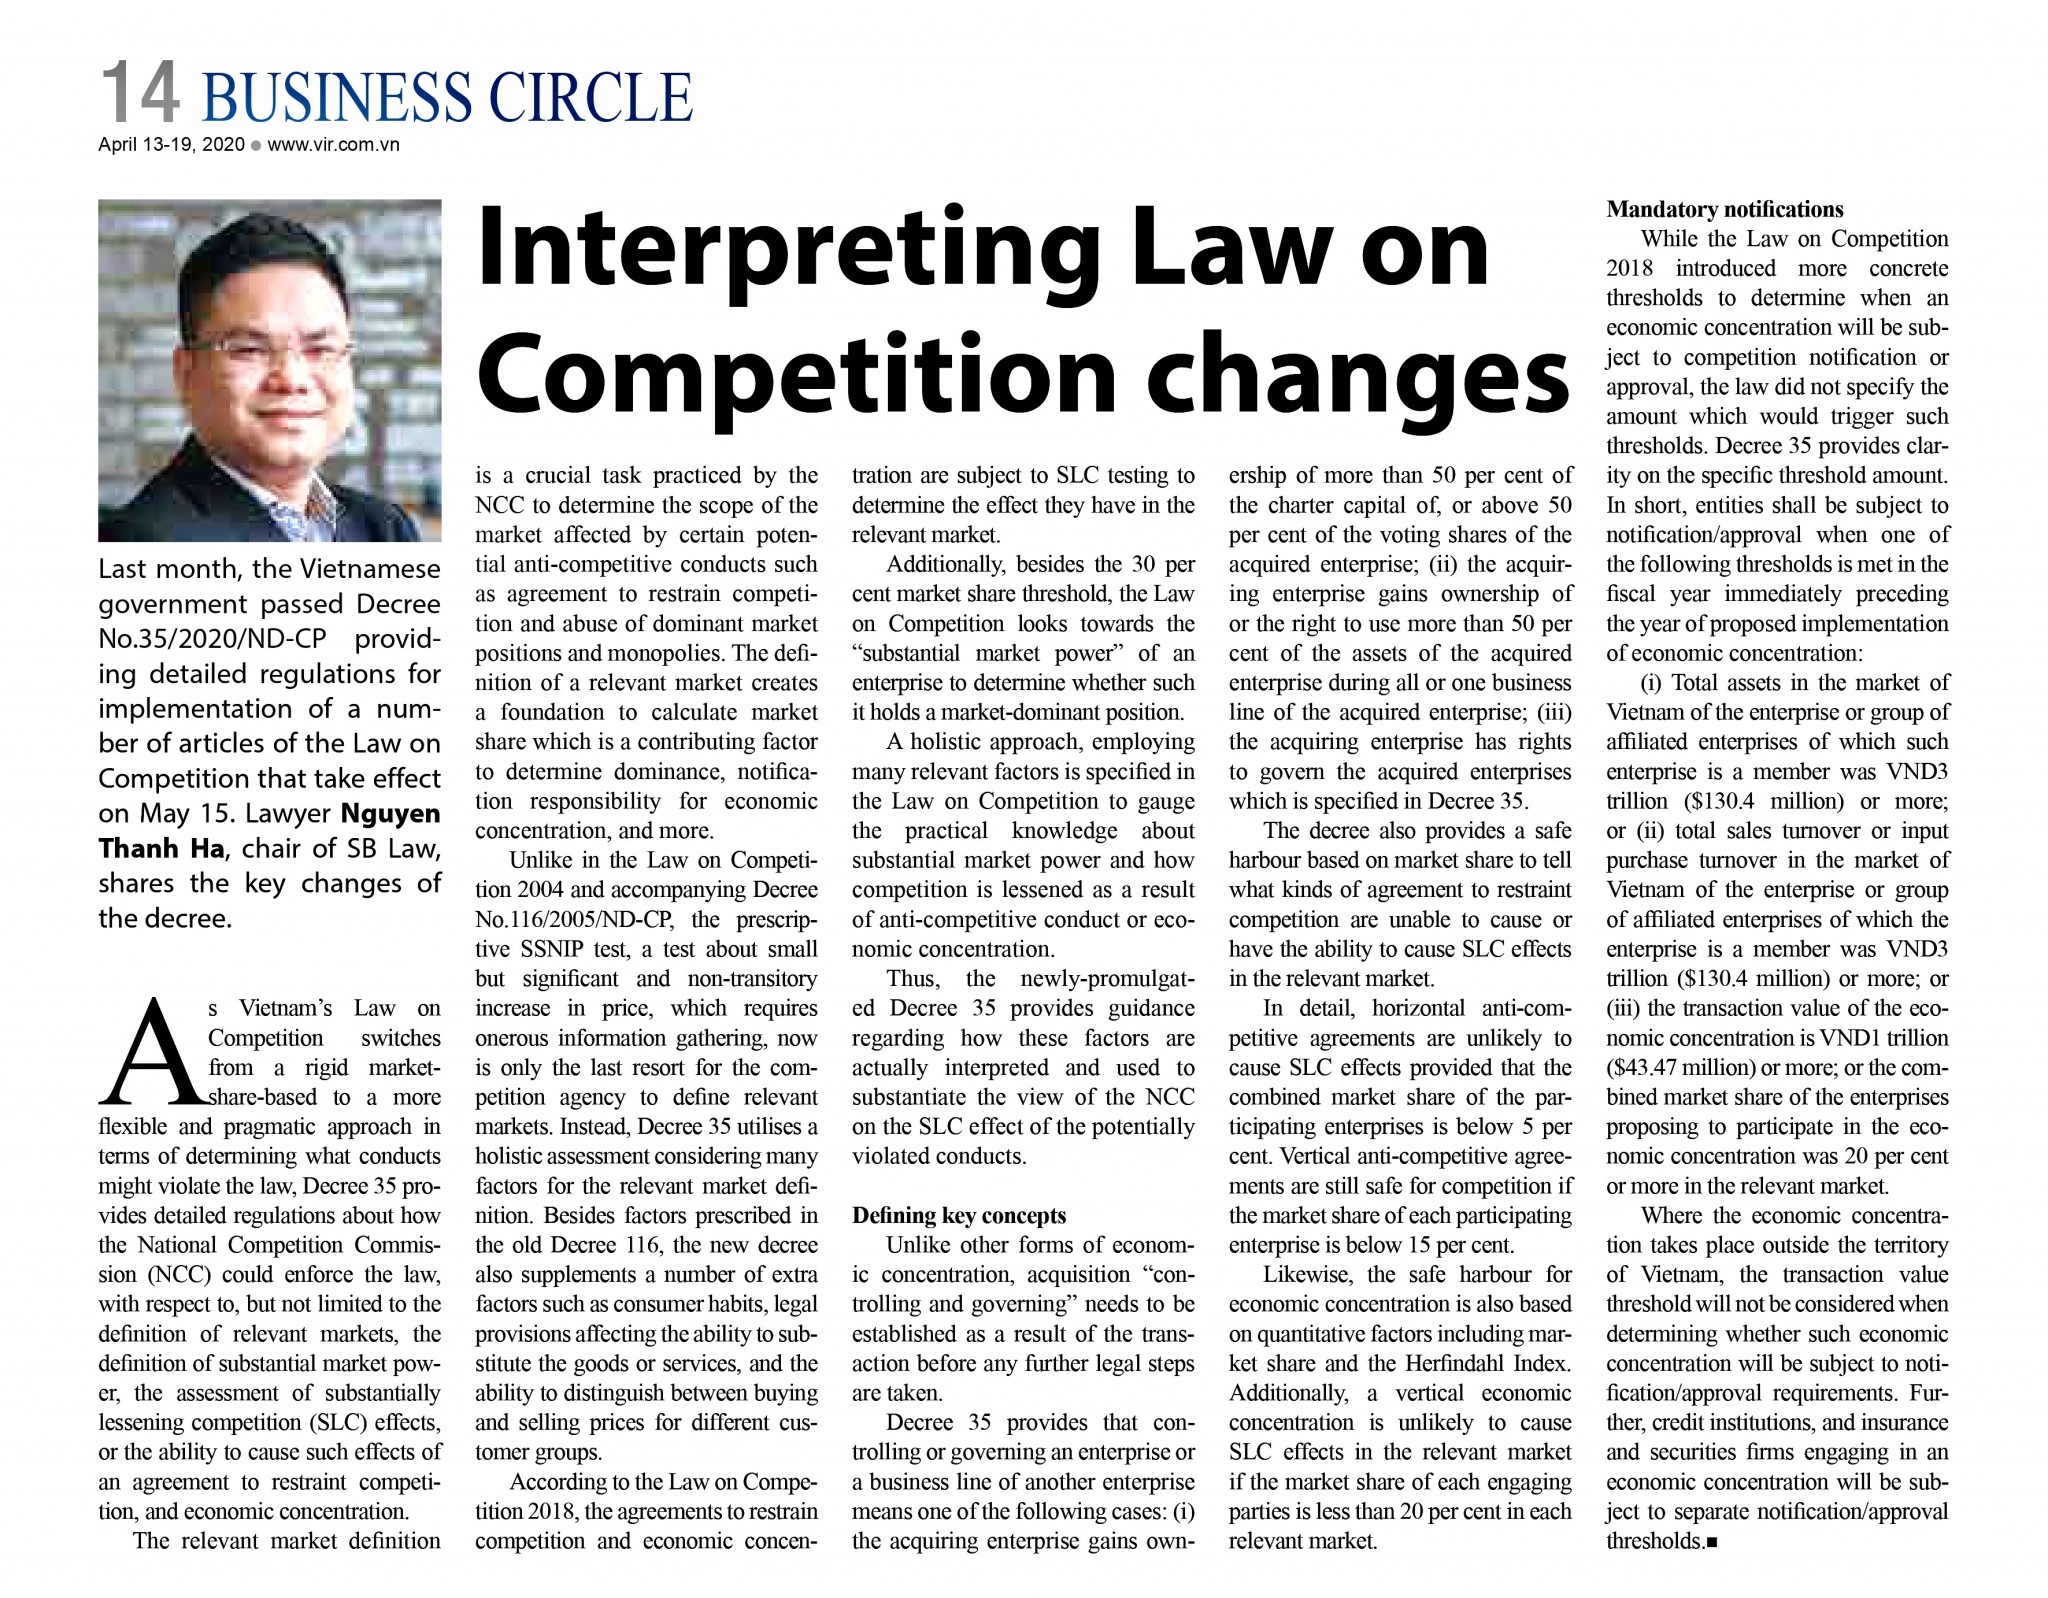 INTERPRETING LAW on competition CHANGES.